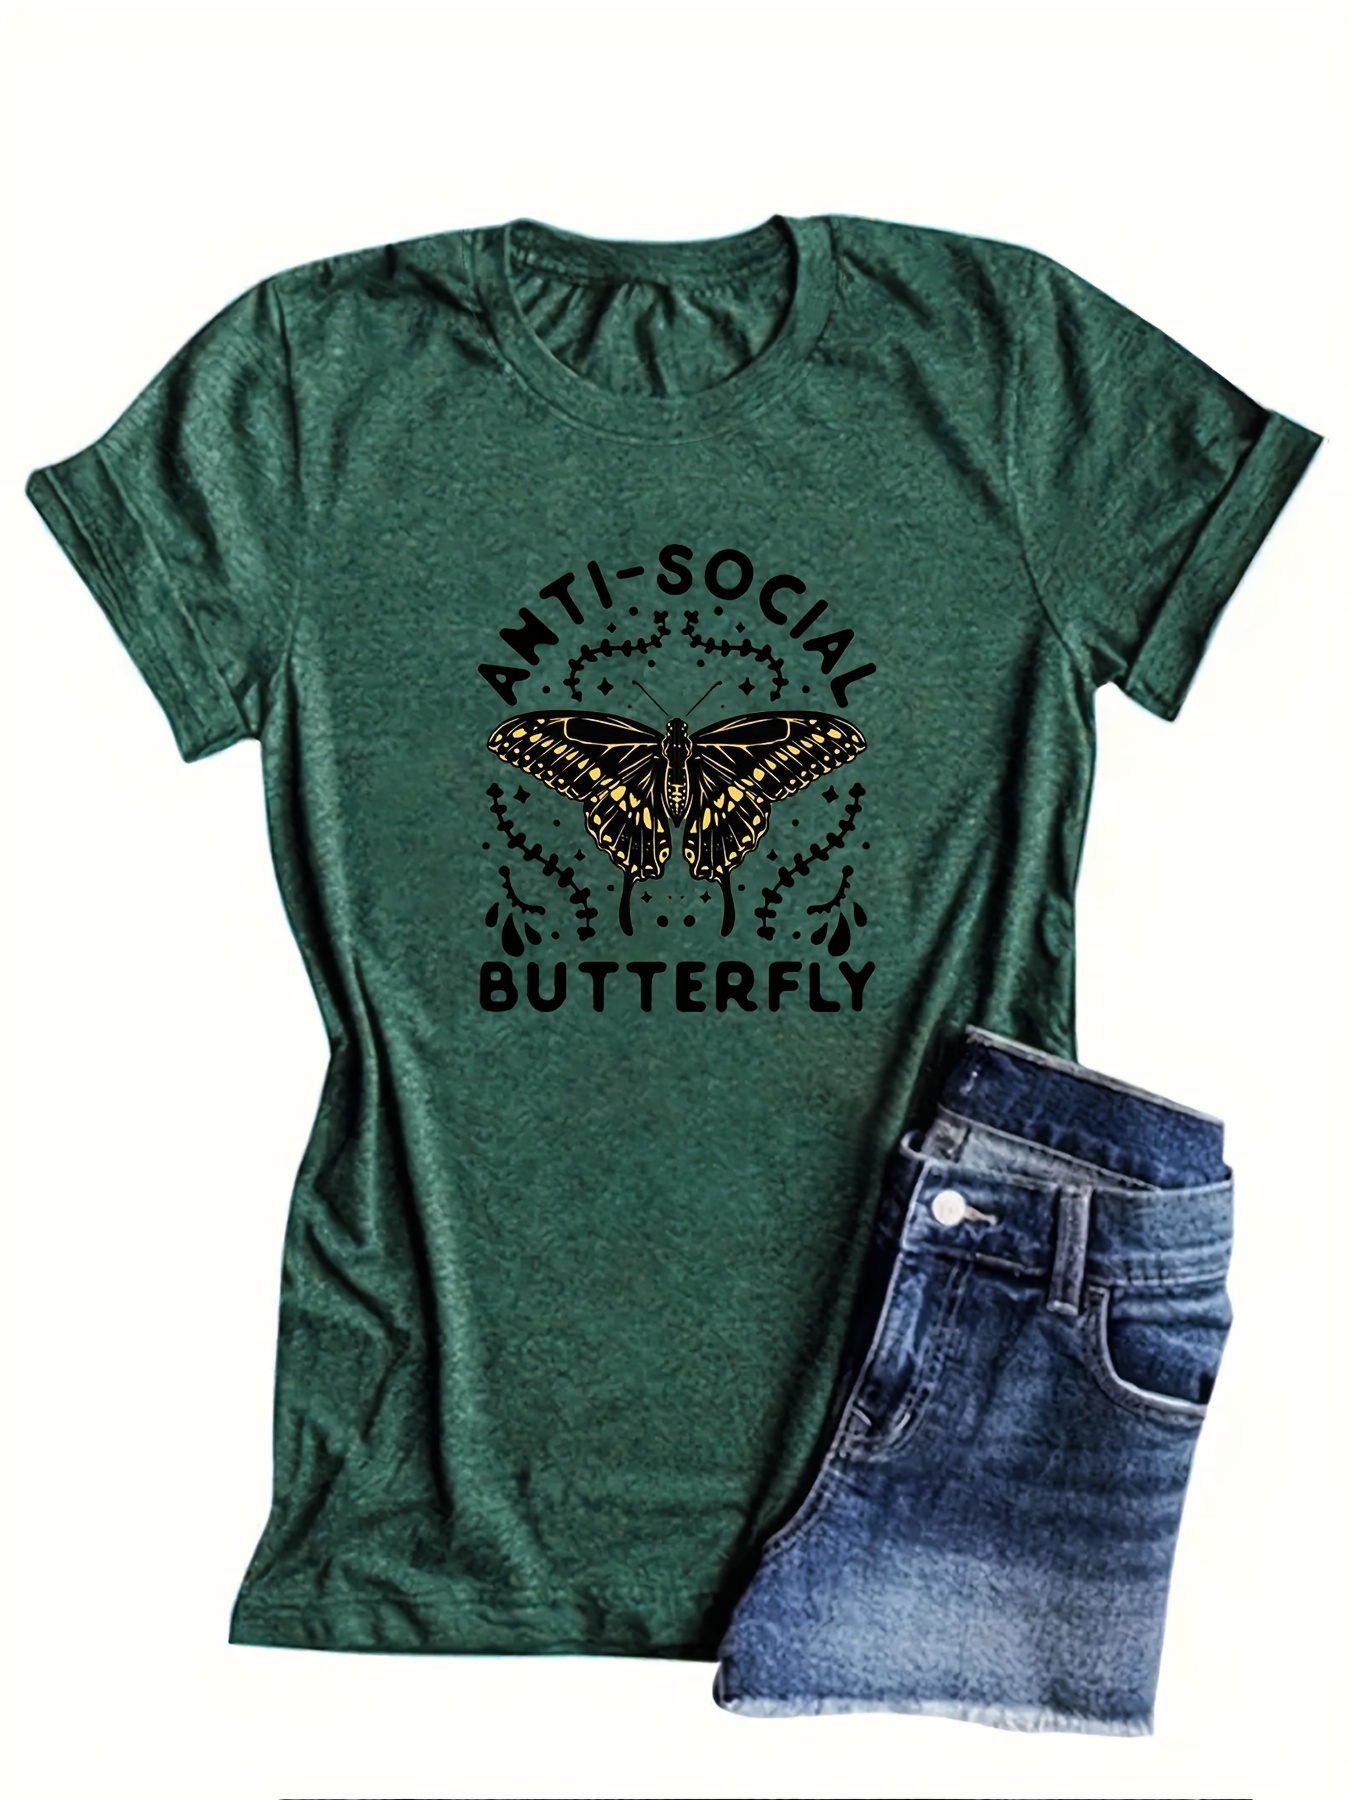 Plus Size Butterfly Print T-shirt, Short Sleeve Crew Neck Casual Top For Spring & Summer, Women's Plus Size Clothing